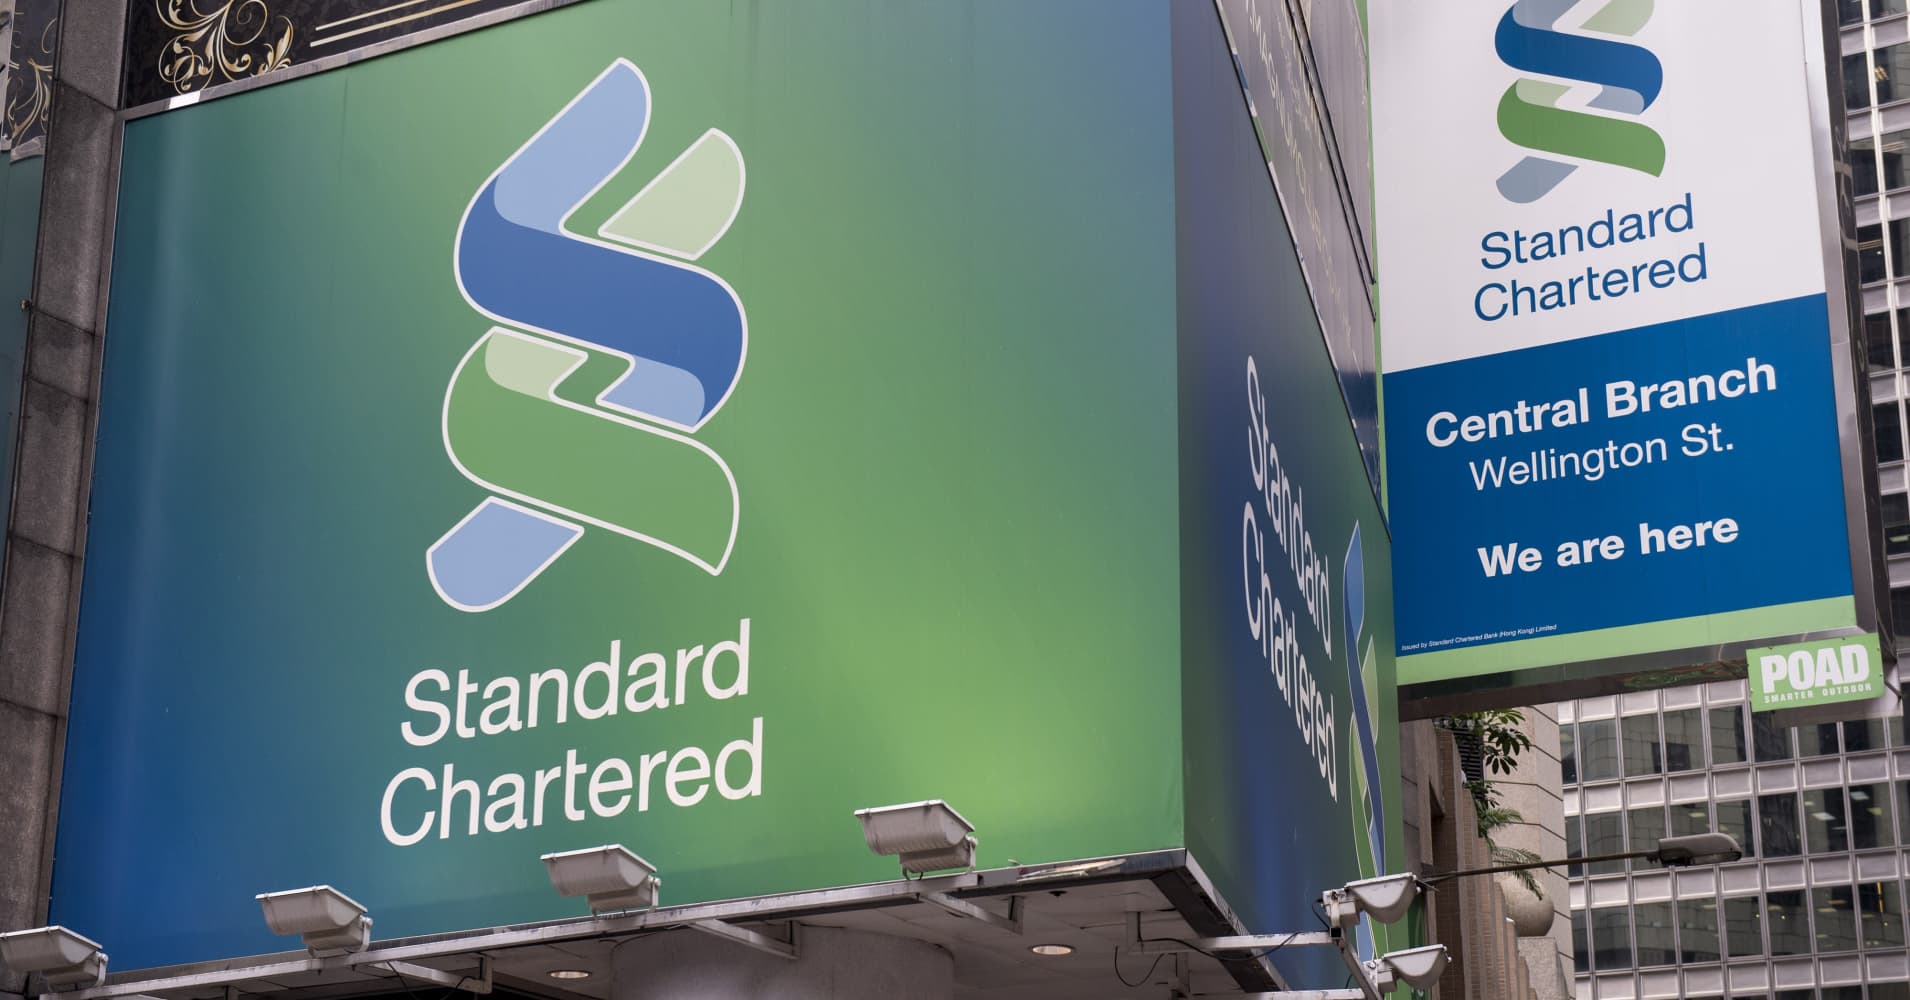 standard-chartered-axes-equities-business-retail-jobs-in-cost-cut-push